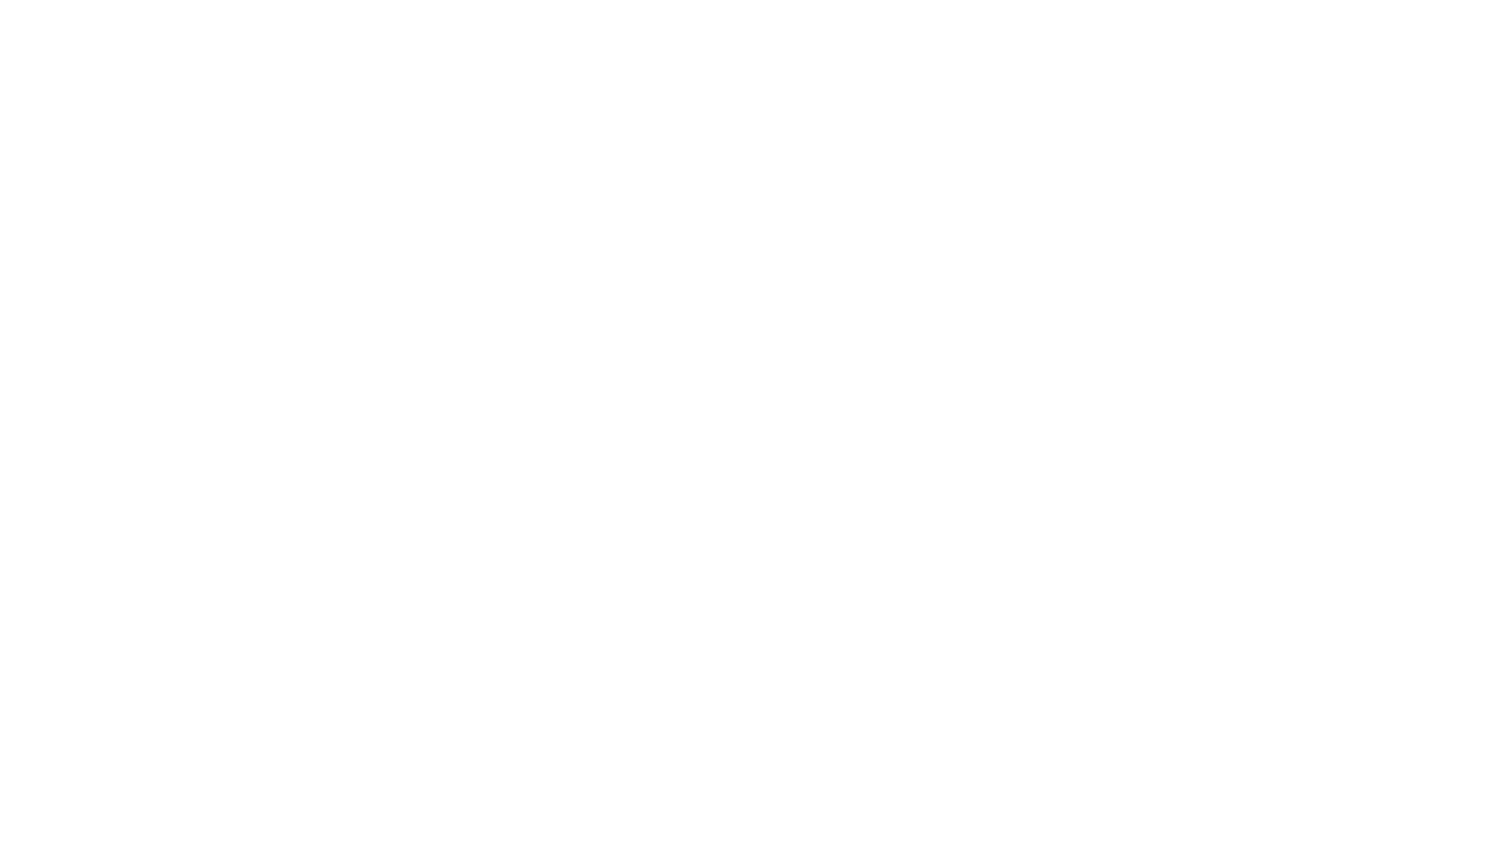 Sowards Contracting Services